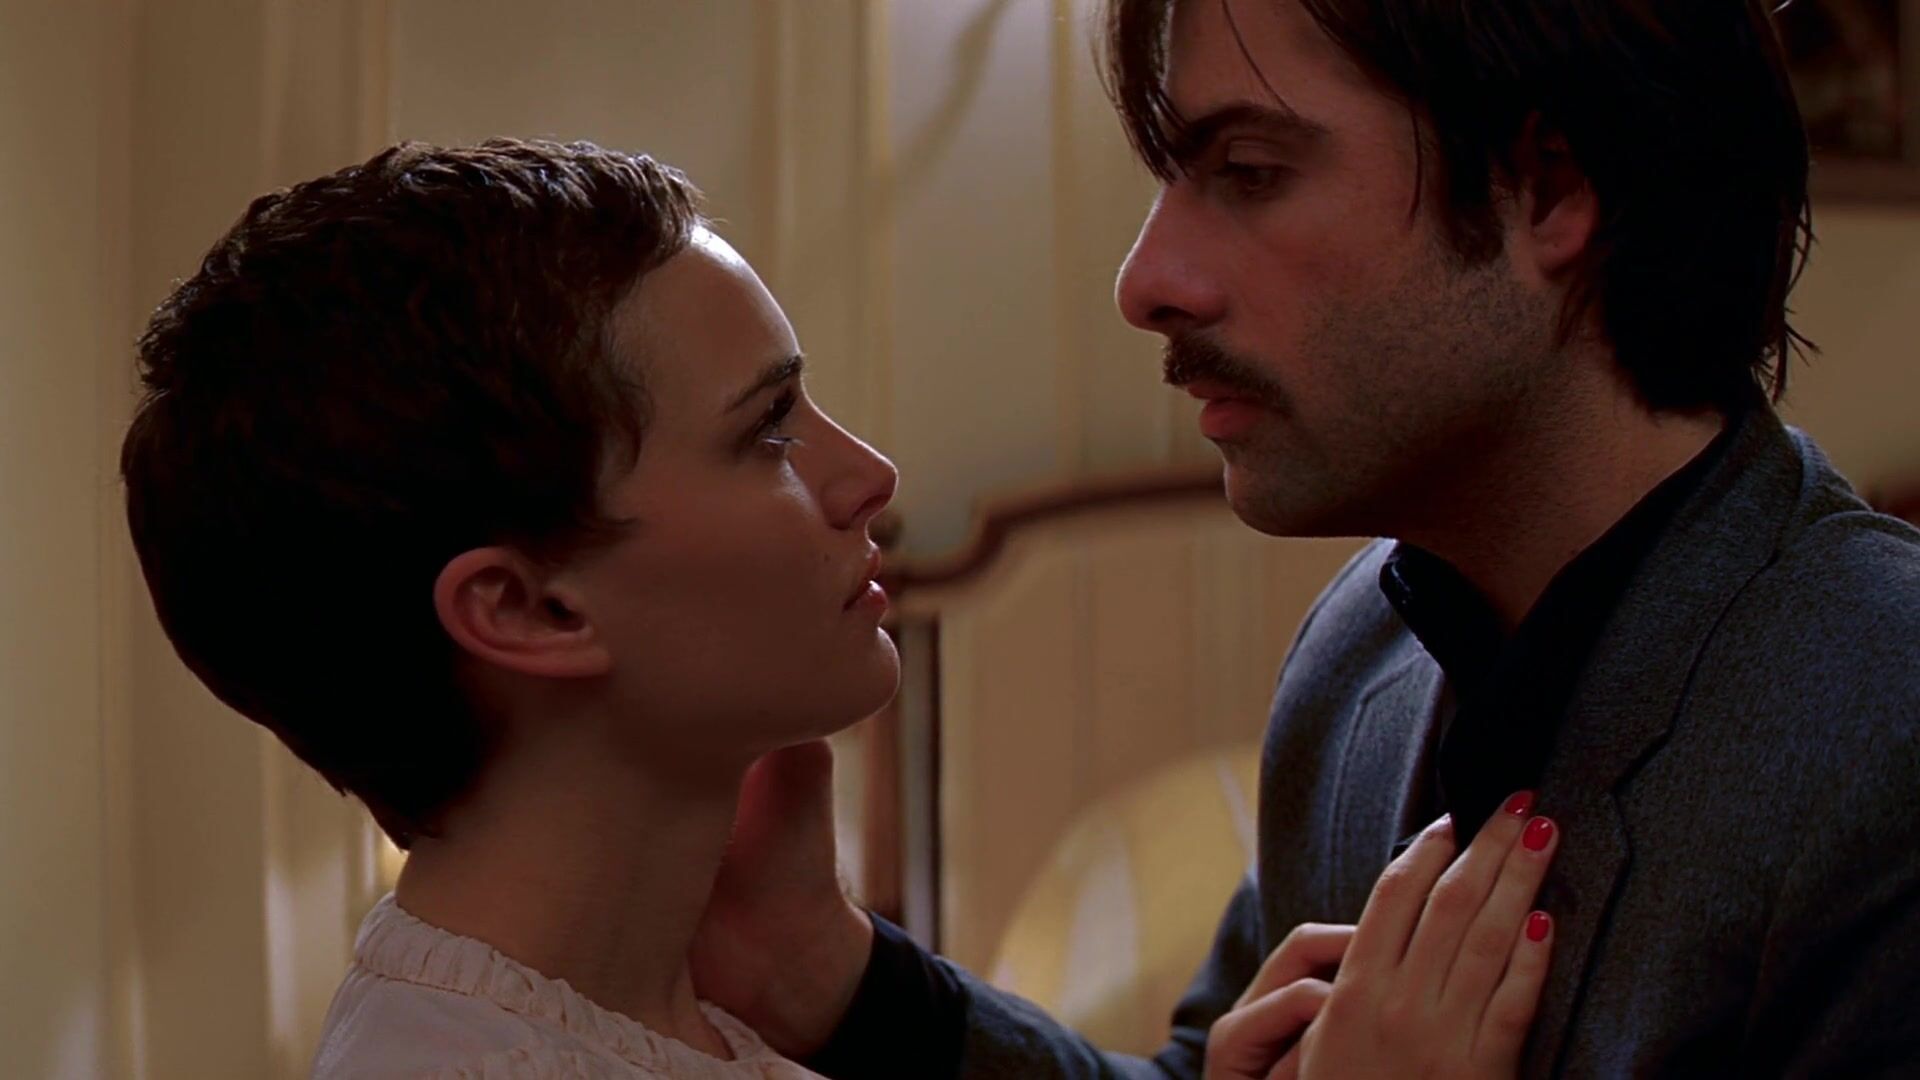 Puba Sexy actress Natalie Portman gives herself to mustachioed guy in Hotel Chevalier (2007) Hentai3D